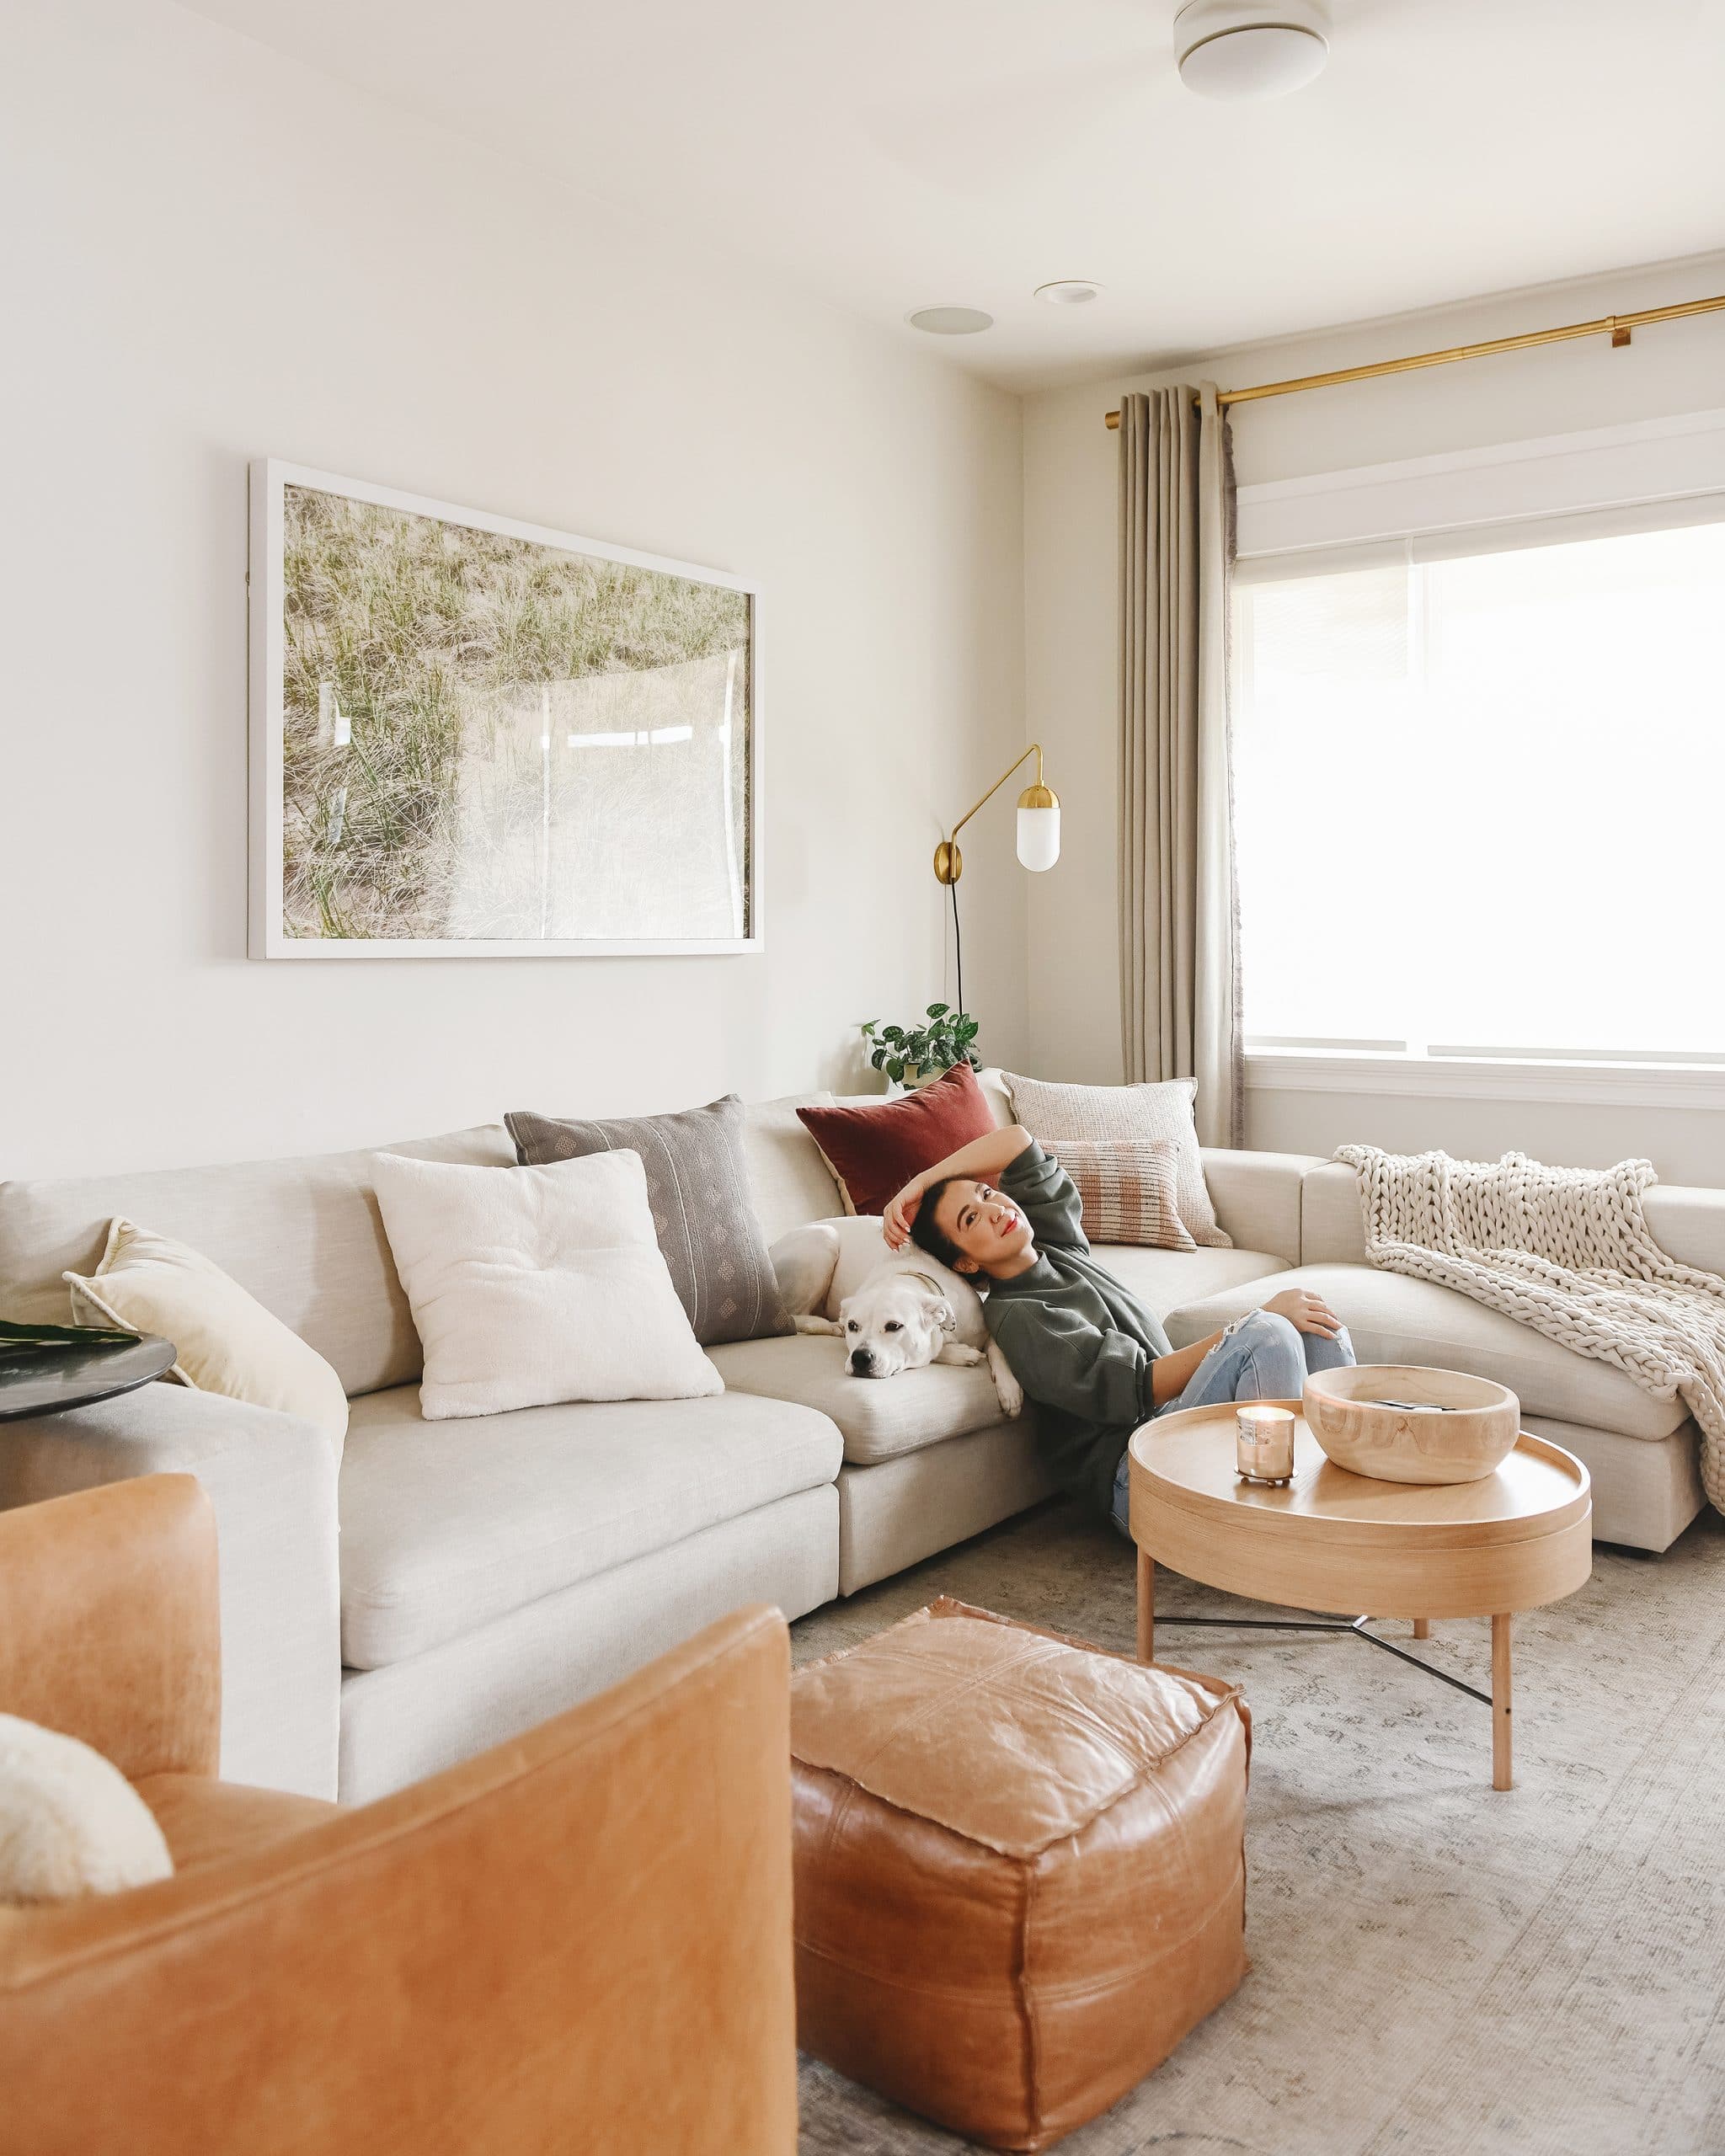 Kim and Kitty relaxing with the sofa | I'm sharing my simple, inviting formula for styling pillows on an L-shaped or U-shaped sofa, via Yellow Brick Home